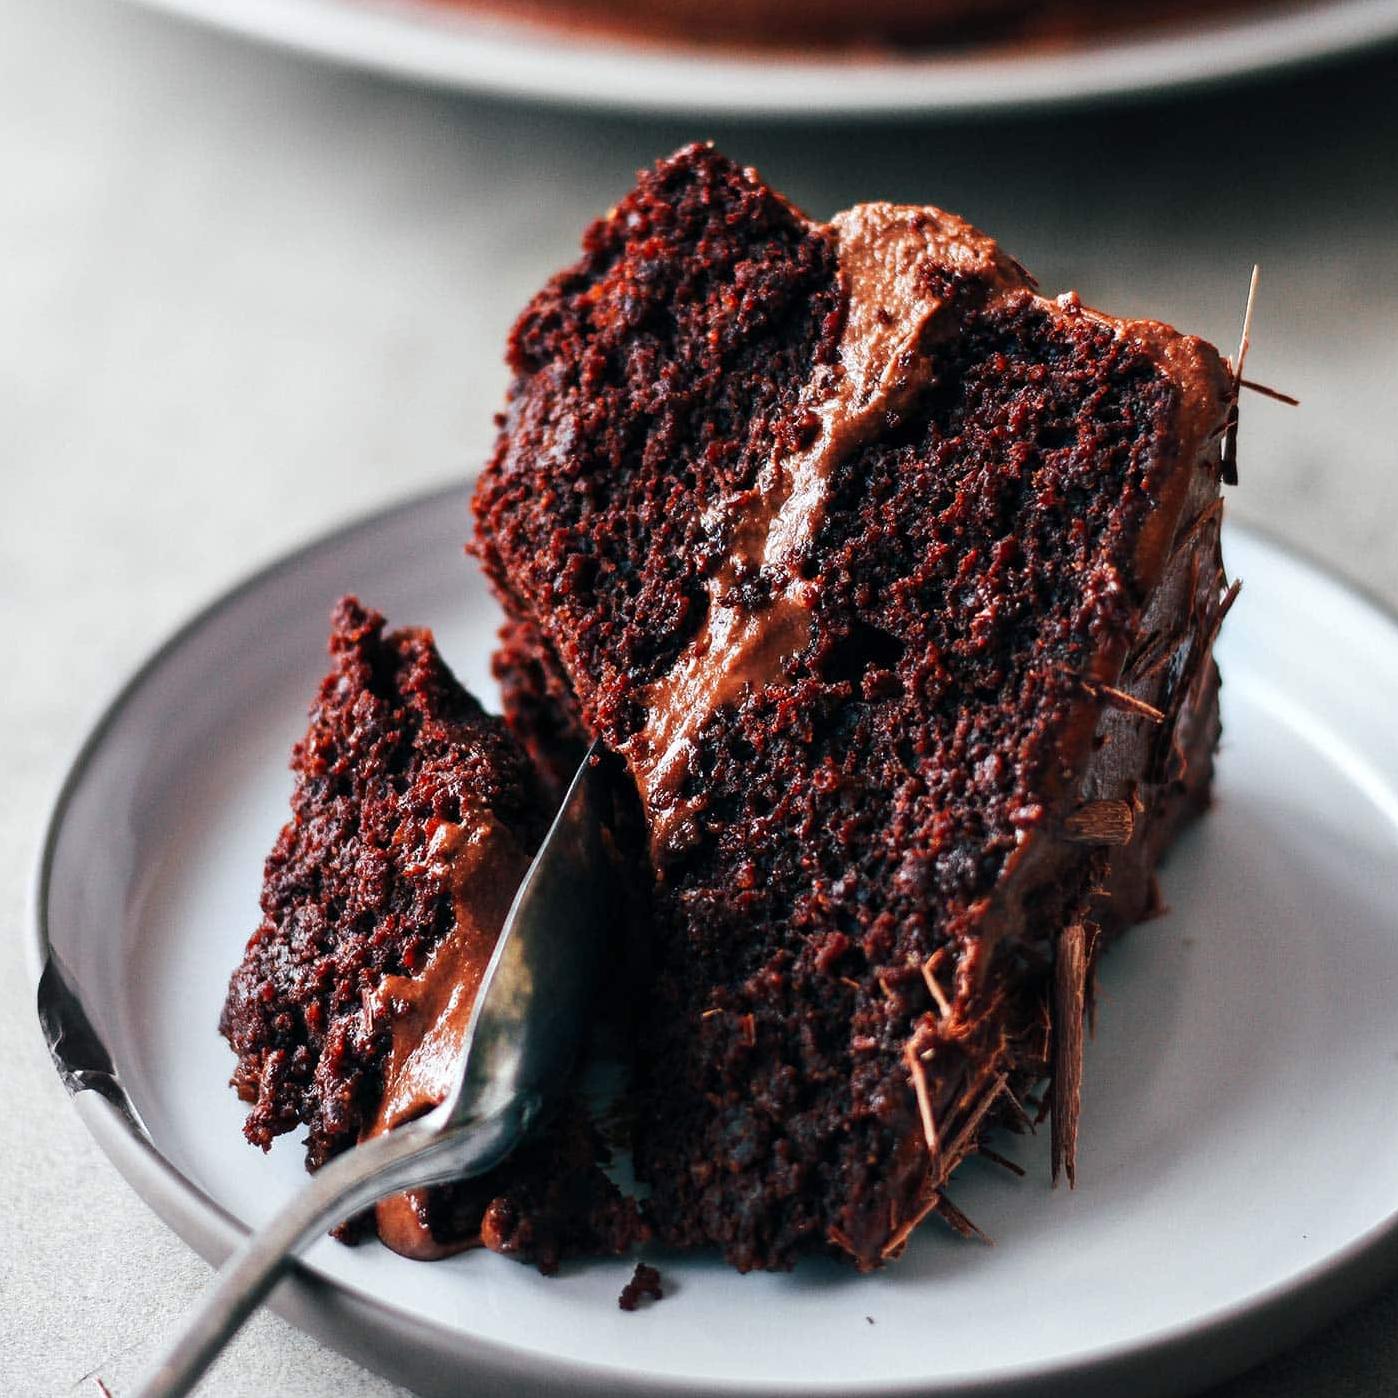  You won't miss the wheat with this fudgy chocolatey delight.